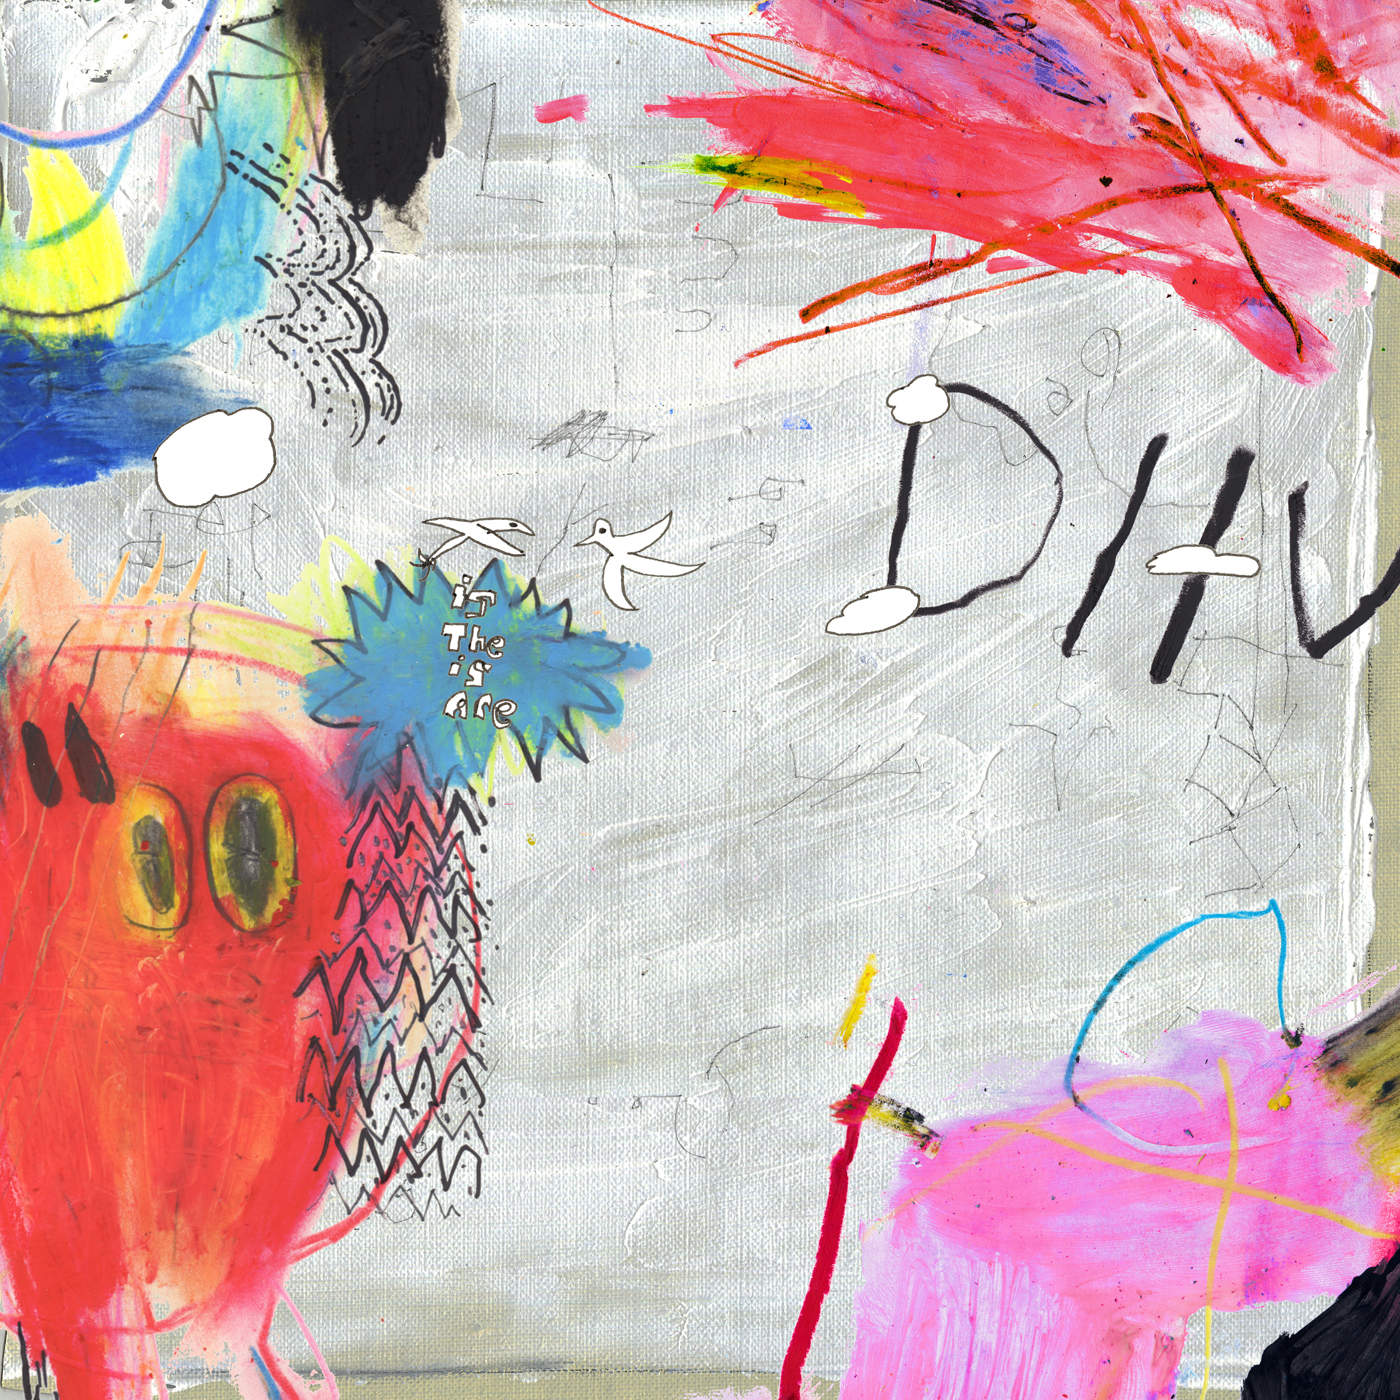 Art for Under the Sun by DIIV